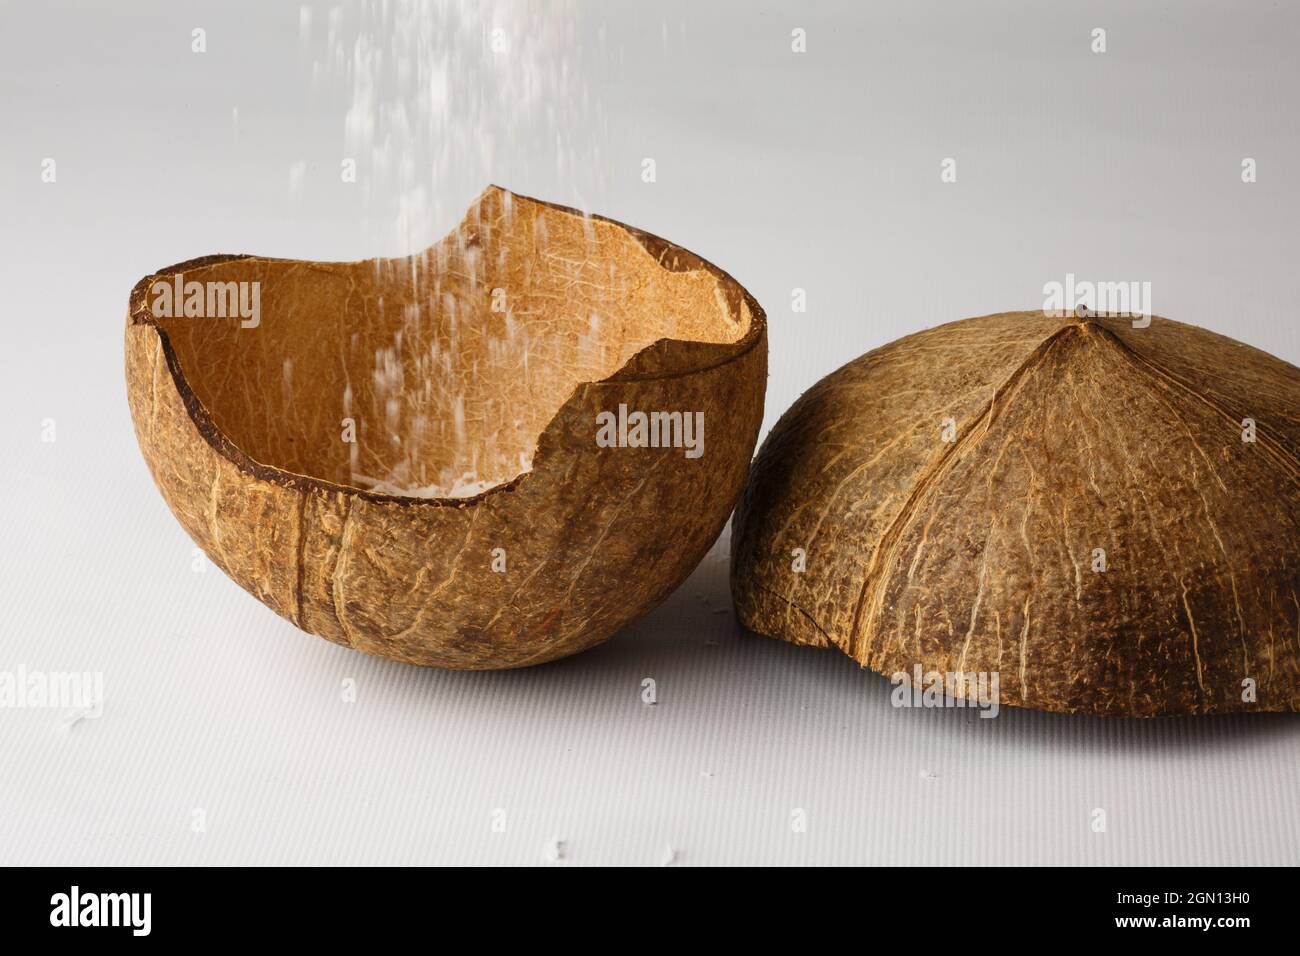 Coconut shell isolated on white background. The coconut flakes are removed from the inside of the coconut shell. Stock Photo